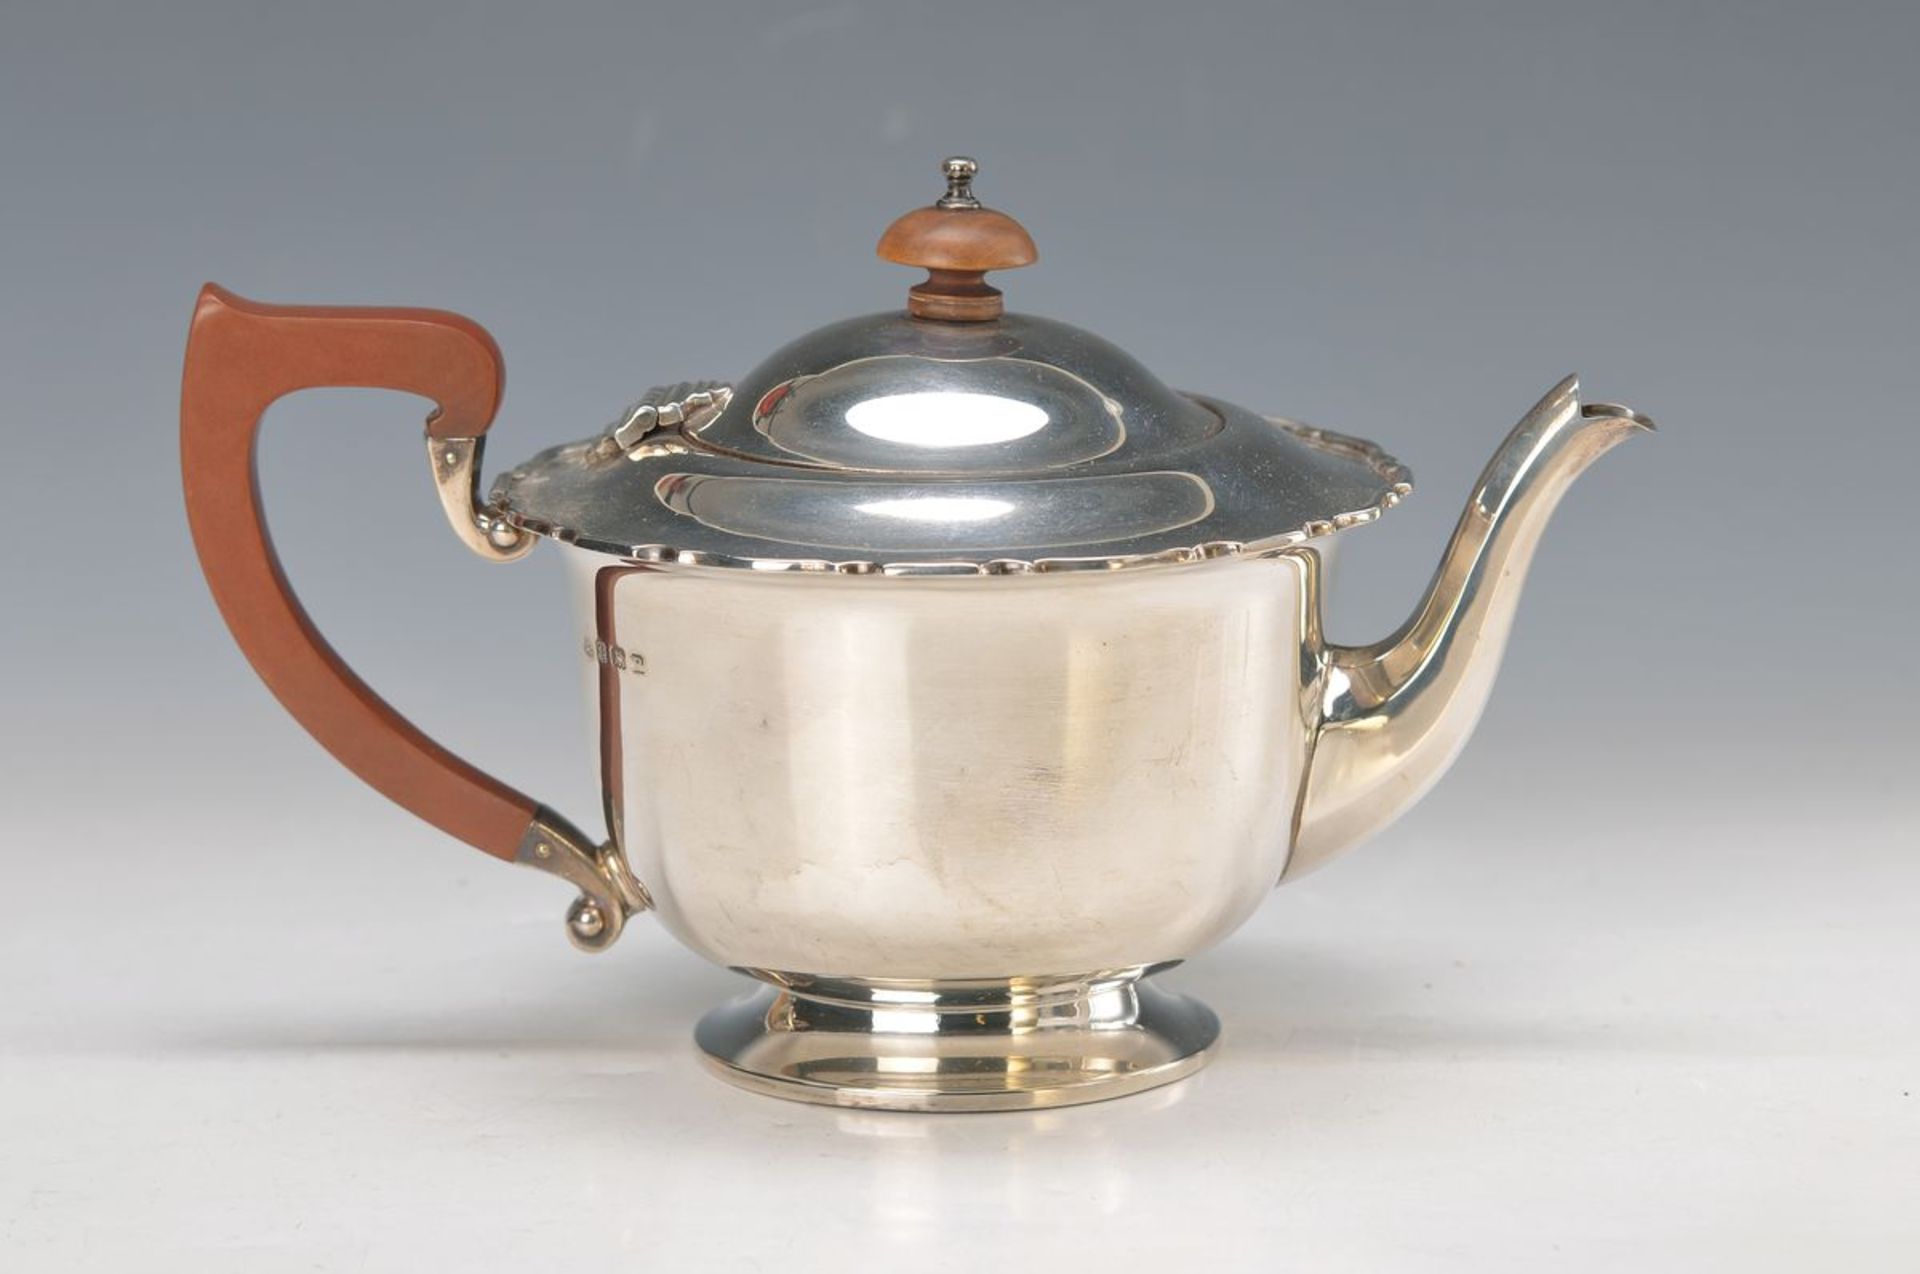 tea pot, Birmingham, around 1920, Sterling silver, in so-called late Victorian style, good